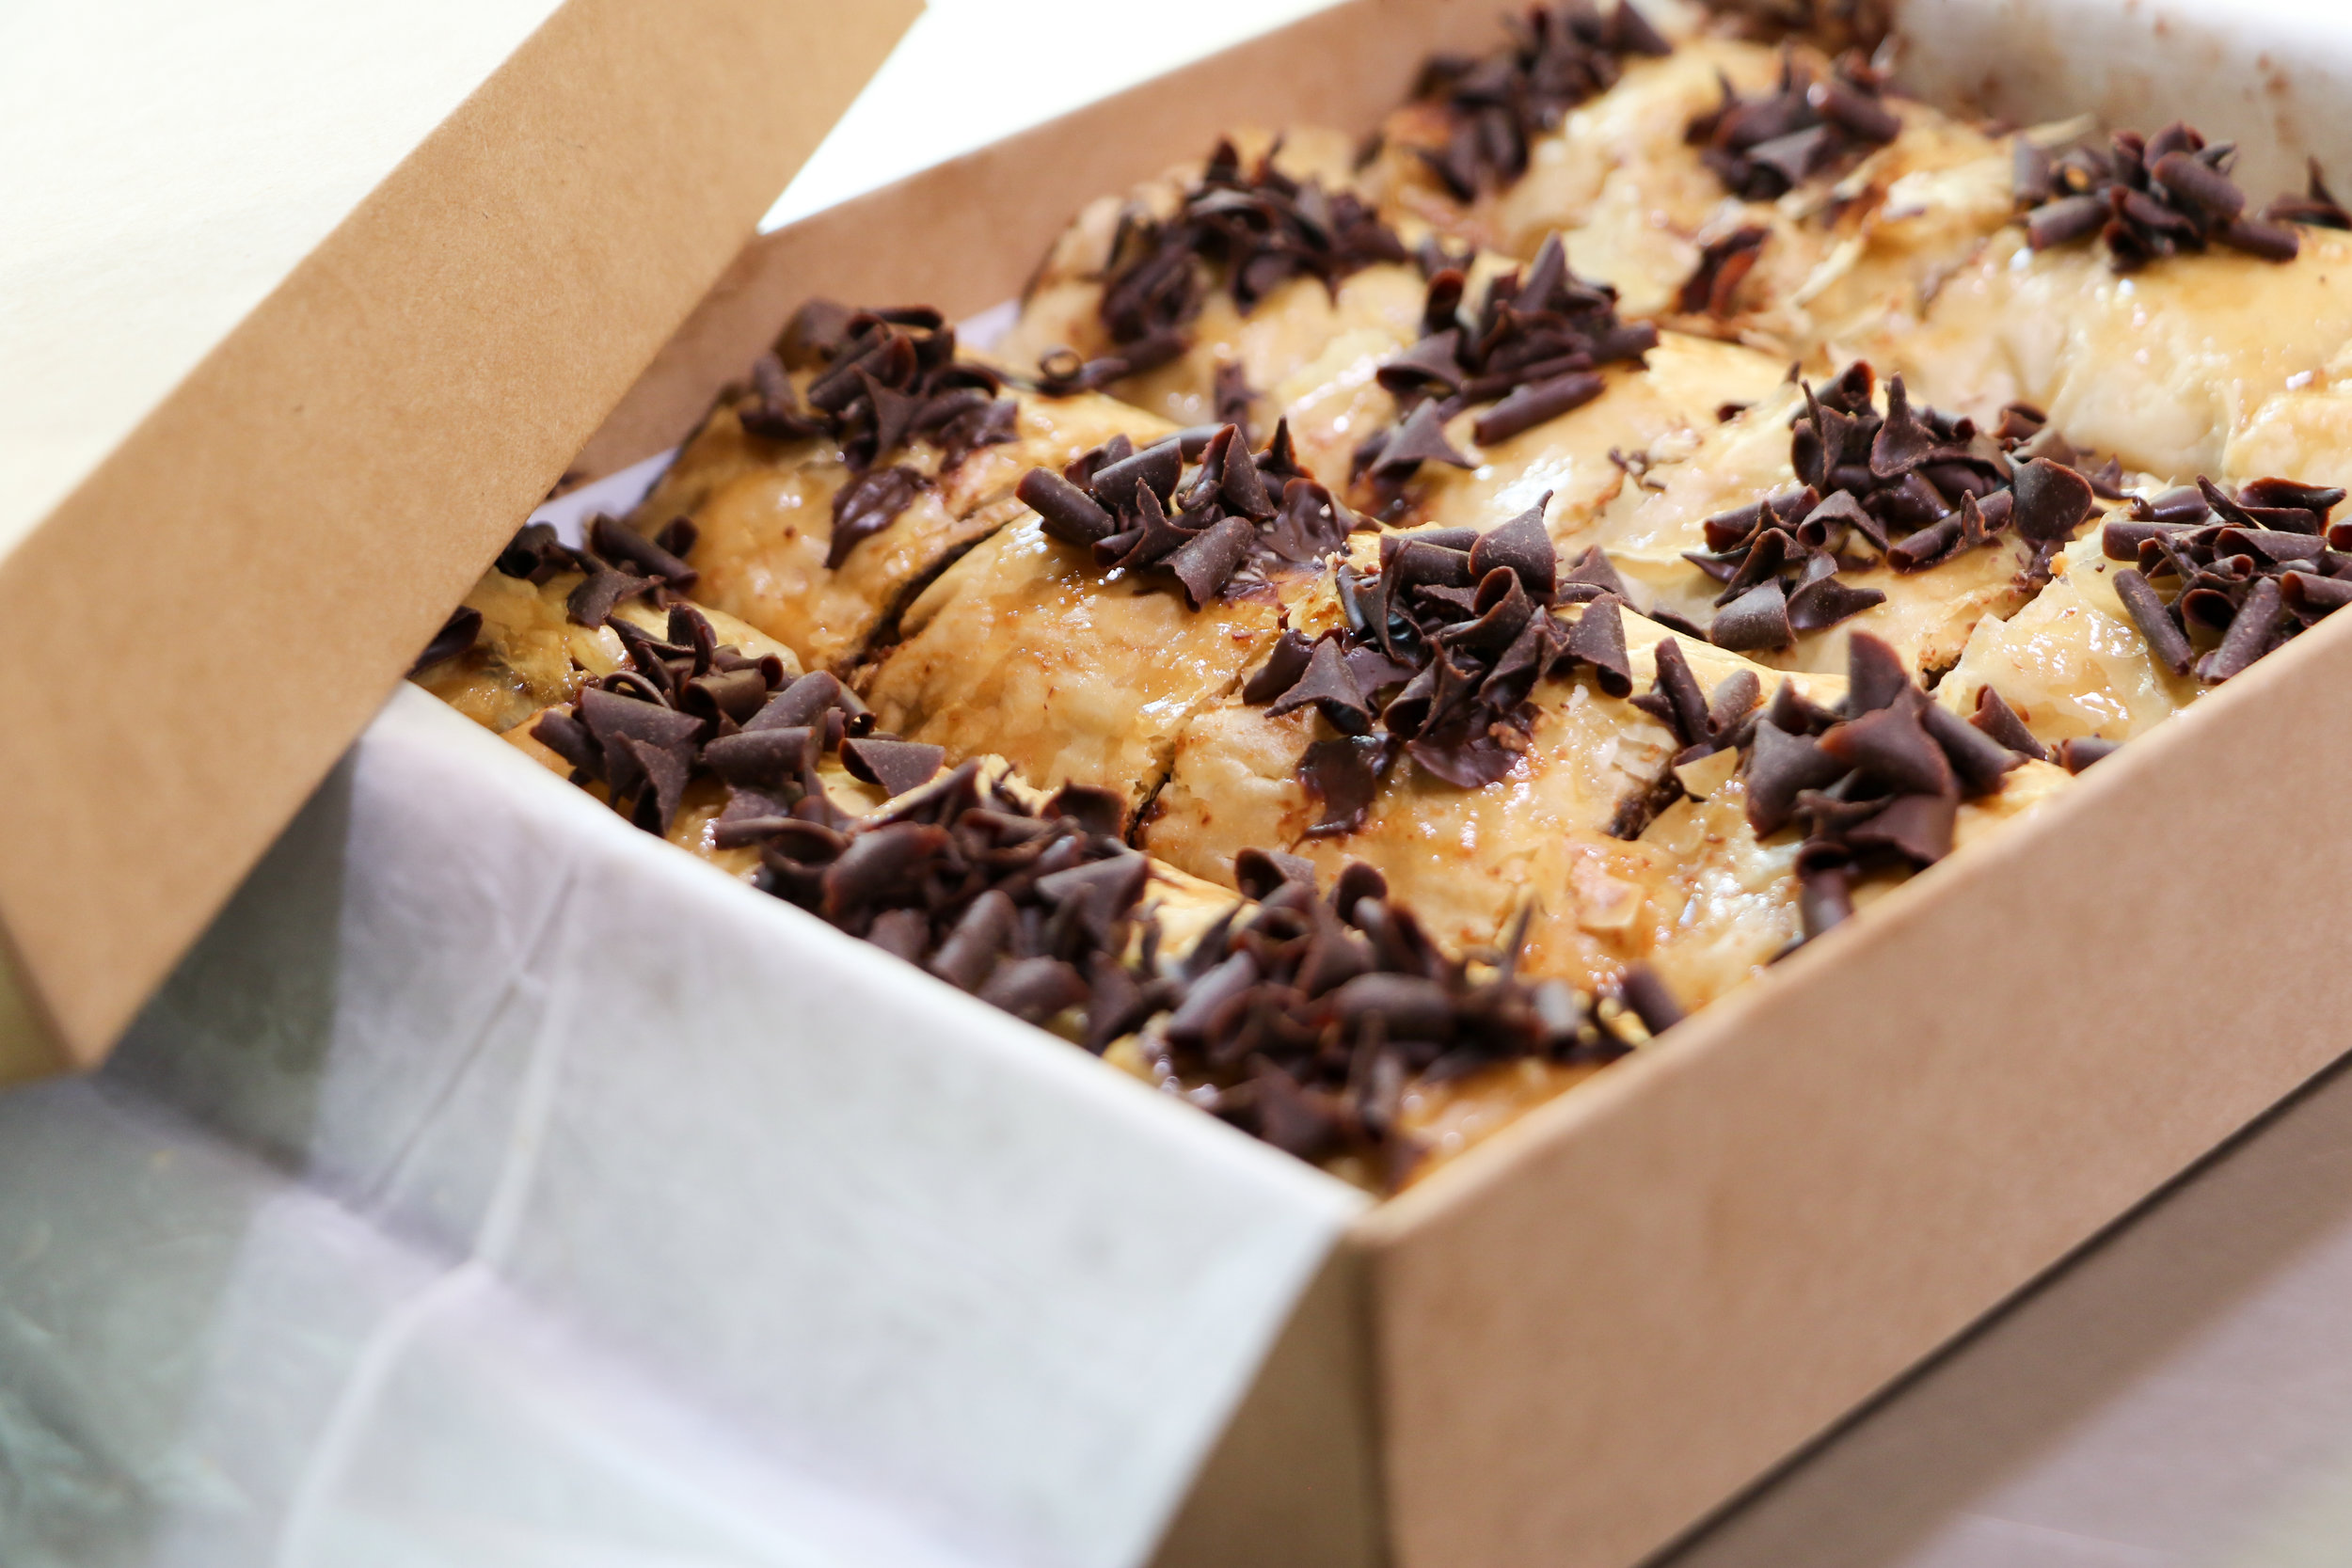 Alt text: peer into a brown cardboard box full of baklava with grated chocolate curls on top